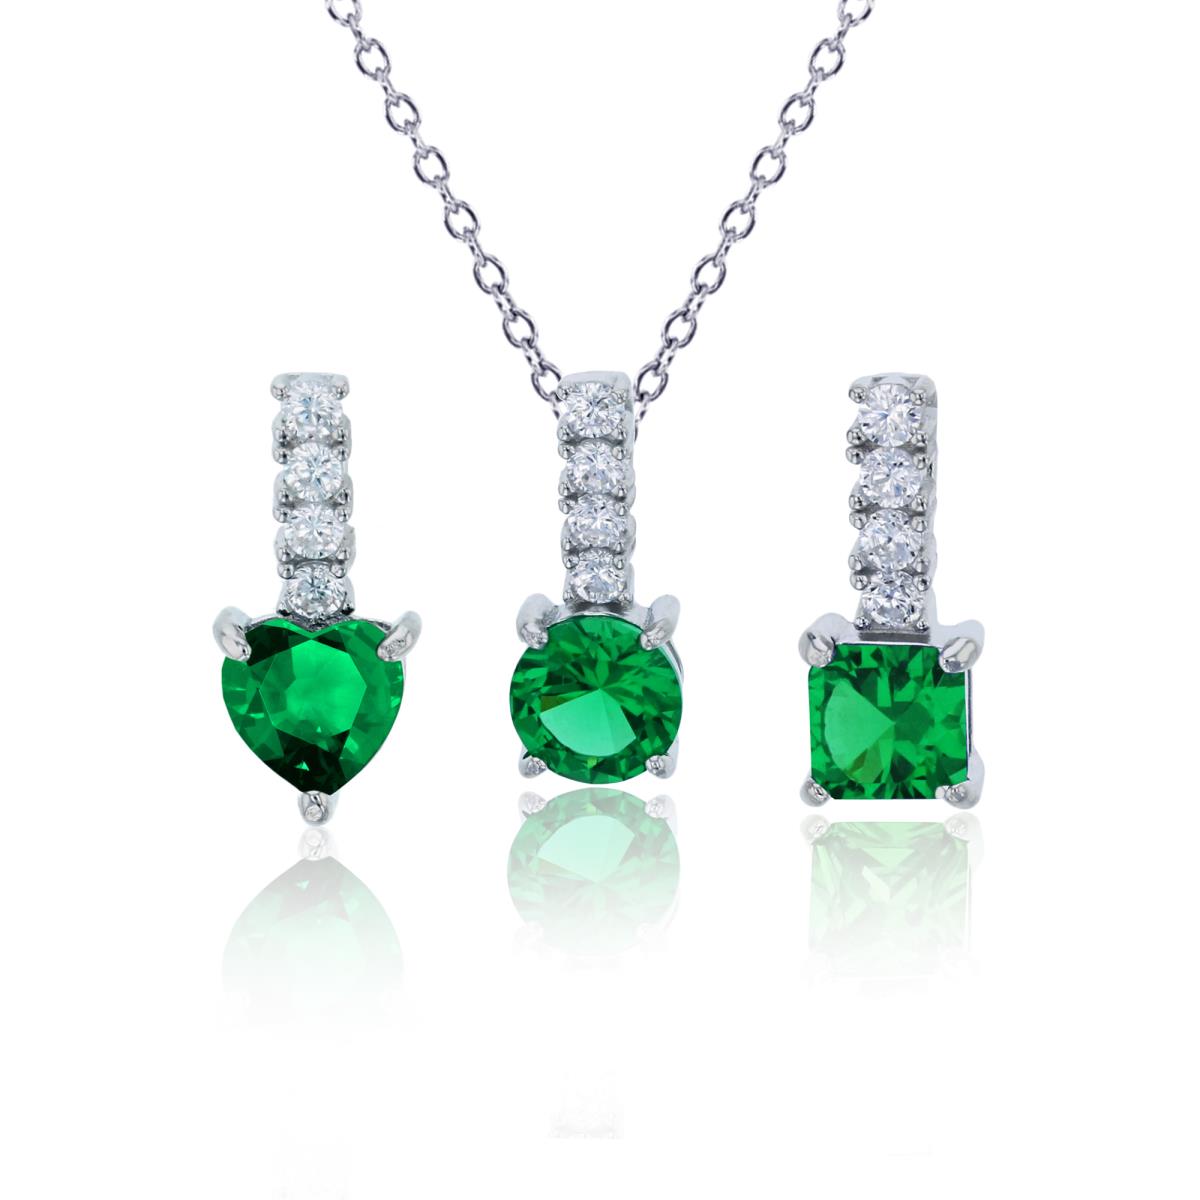 Sterling Silver Rhodium Green 6mm Rd, Heart & 5mm Princess Cut Drop Pendants Set with 18" Rollo Chain